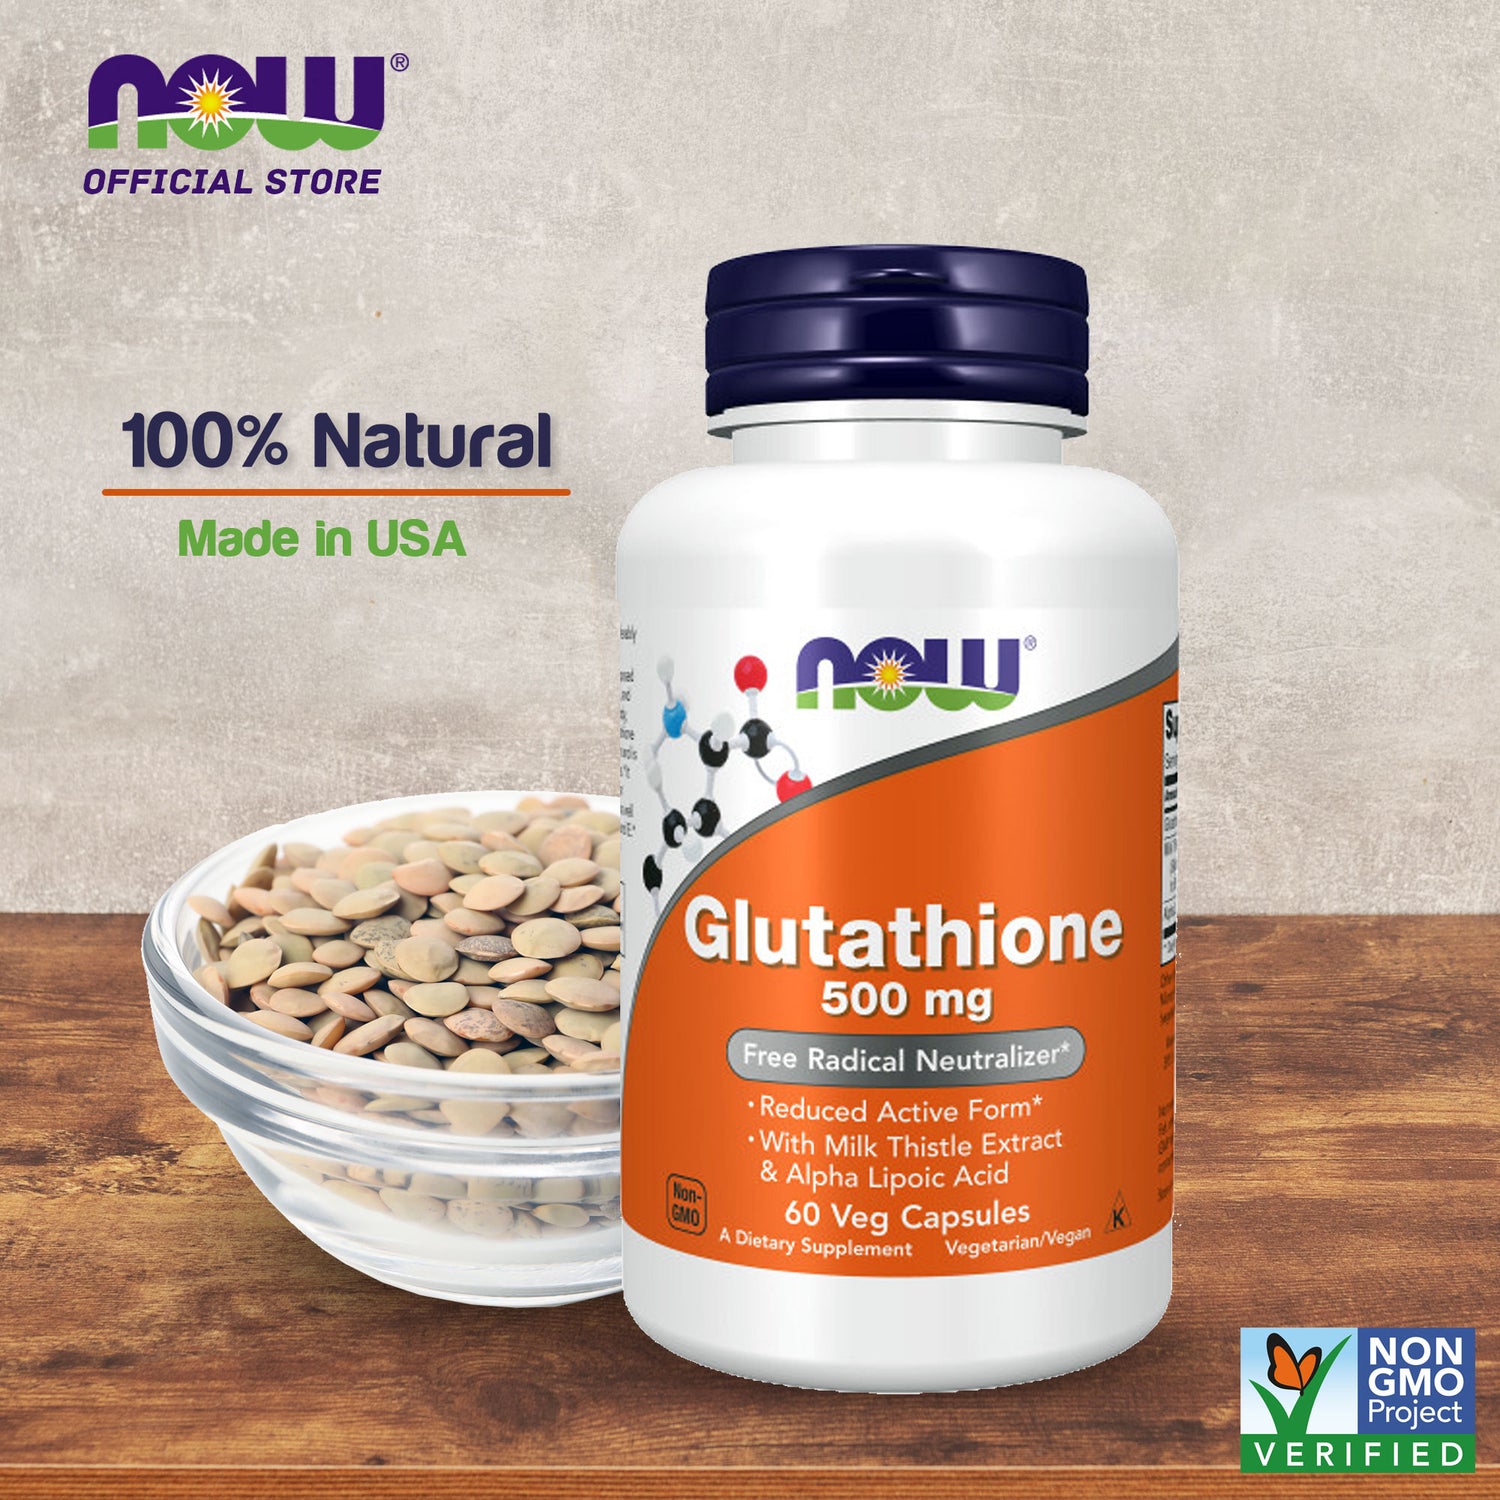 NOW Supplements, Glutathione 500 mg, With Milk Thistle Extract & Alpha Lipoic Acid, Free Radical Neutralizer*, 60 Veg Capsules - Bloom Concept